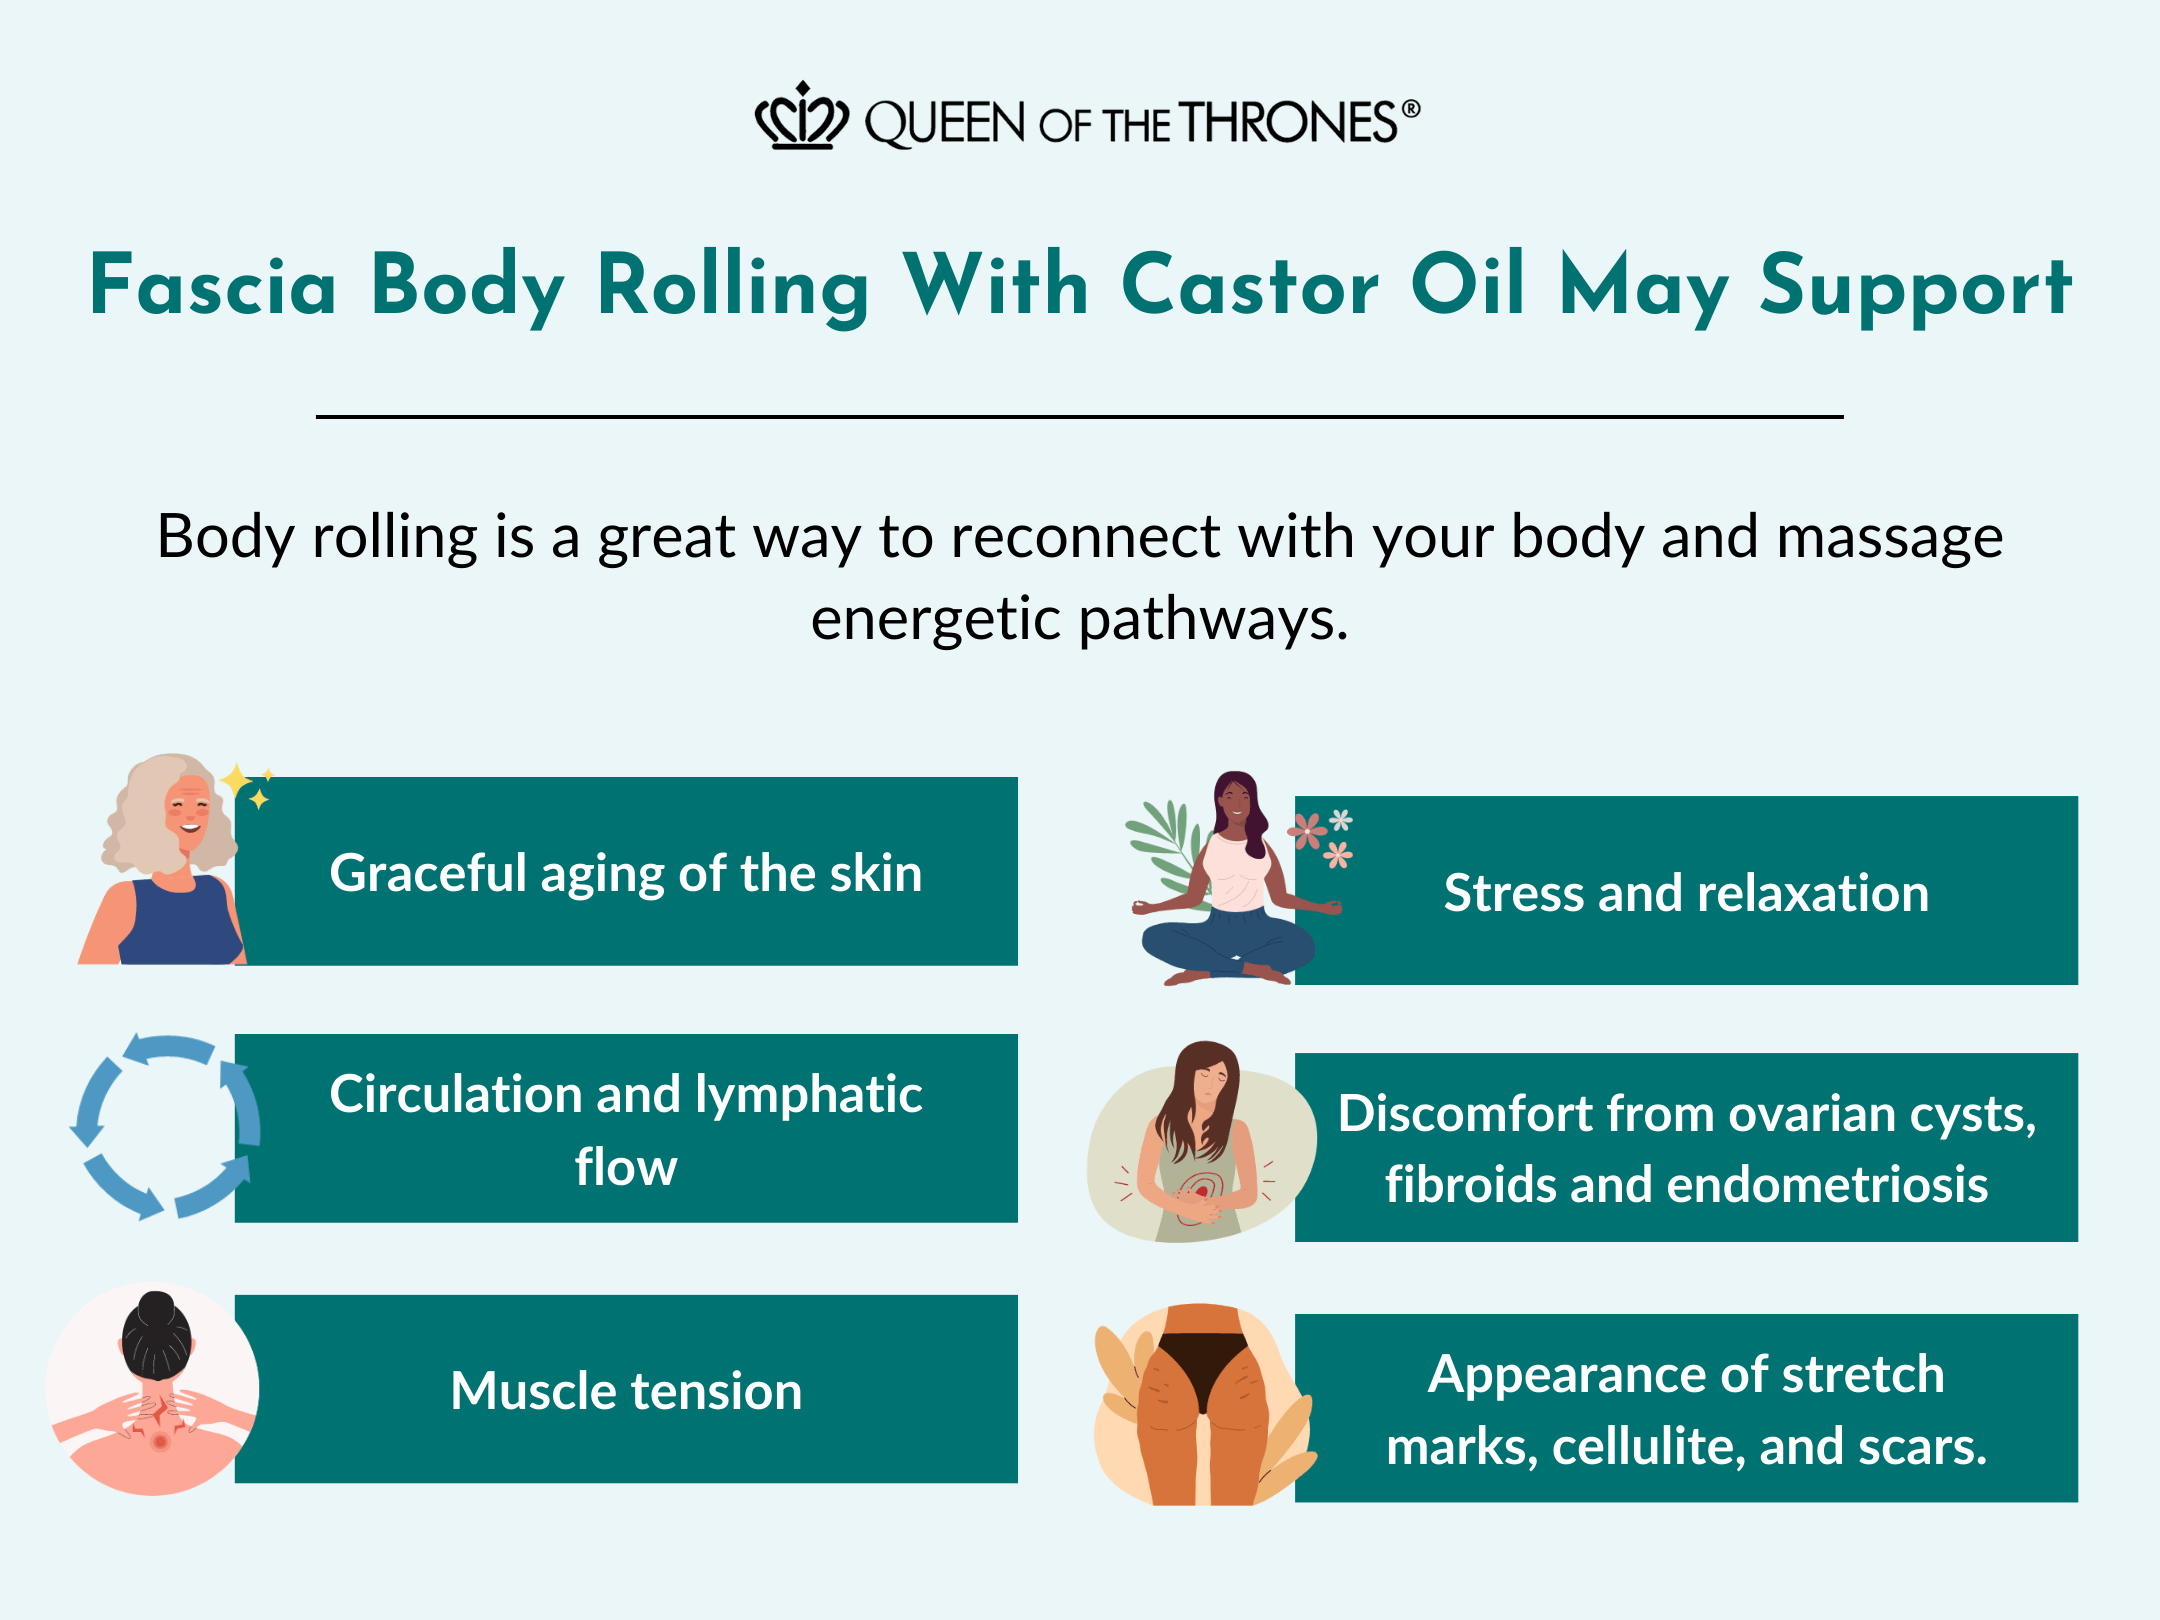 Queen of the Thrones Fascia Body Roller with Castor Oil may support